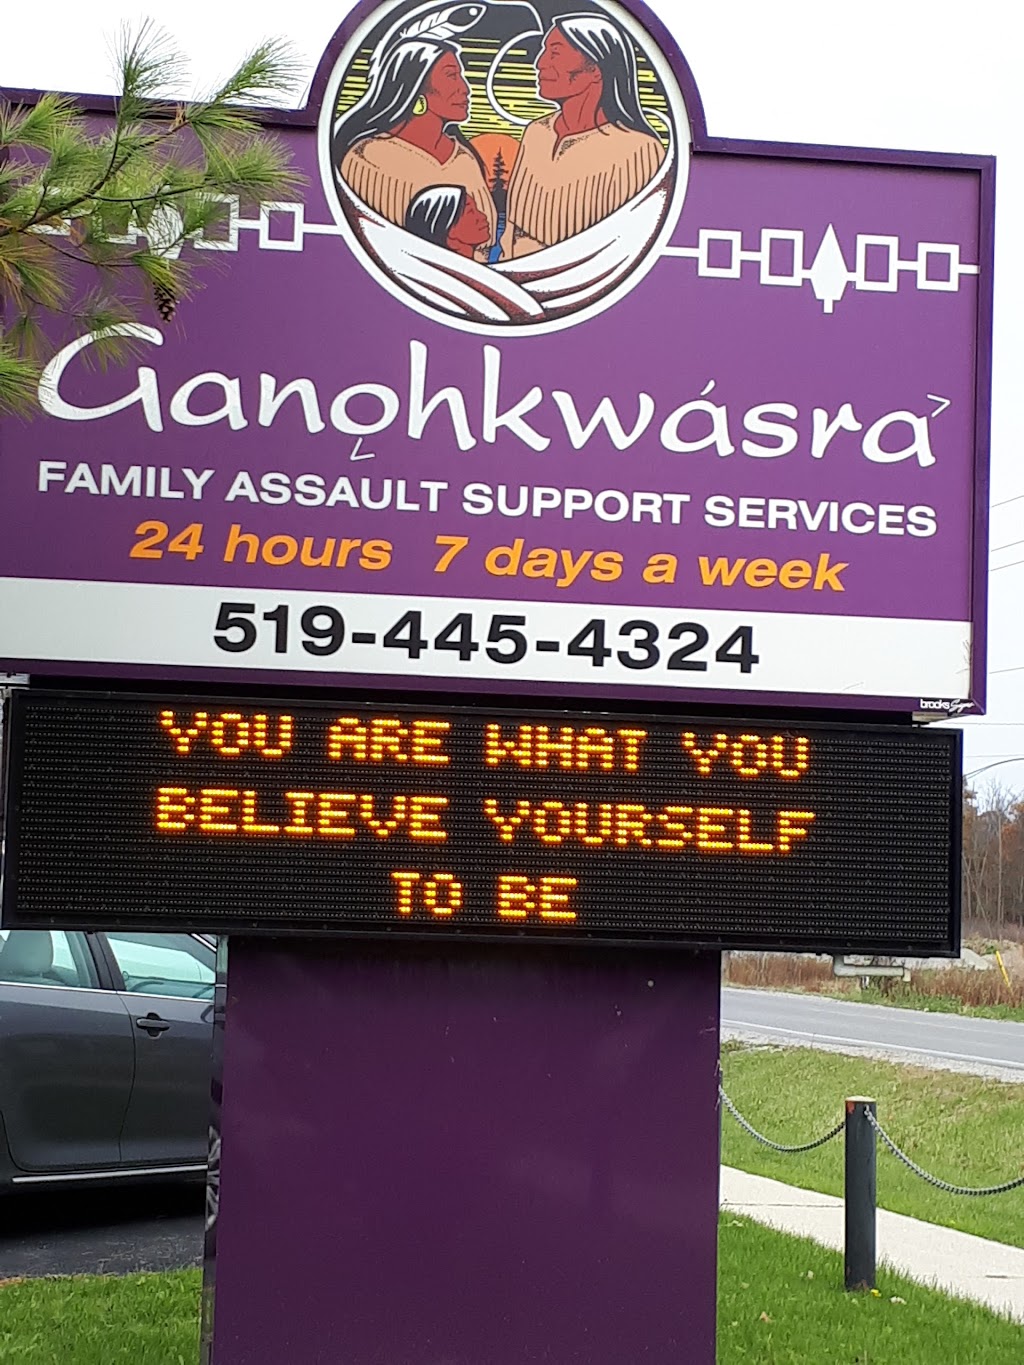 Ganhohkwasra Family Assault Support Services | 1781 Chiefswood Rd, Ohsweken, ON N0A 1M0, Canada | Phone: (519) 445-4324